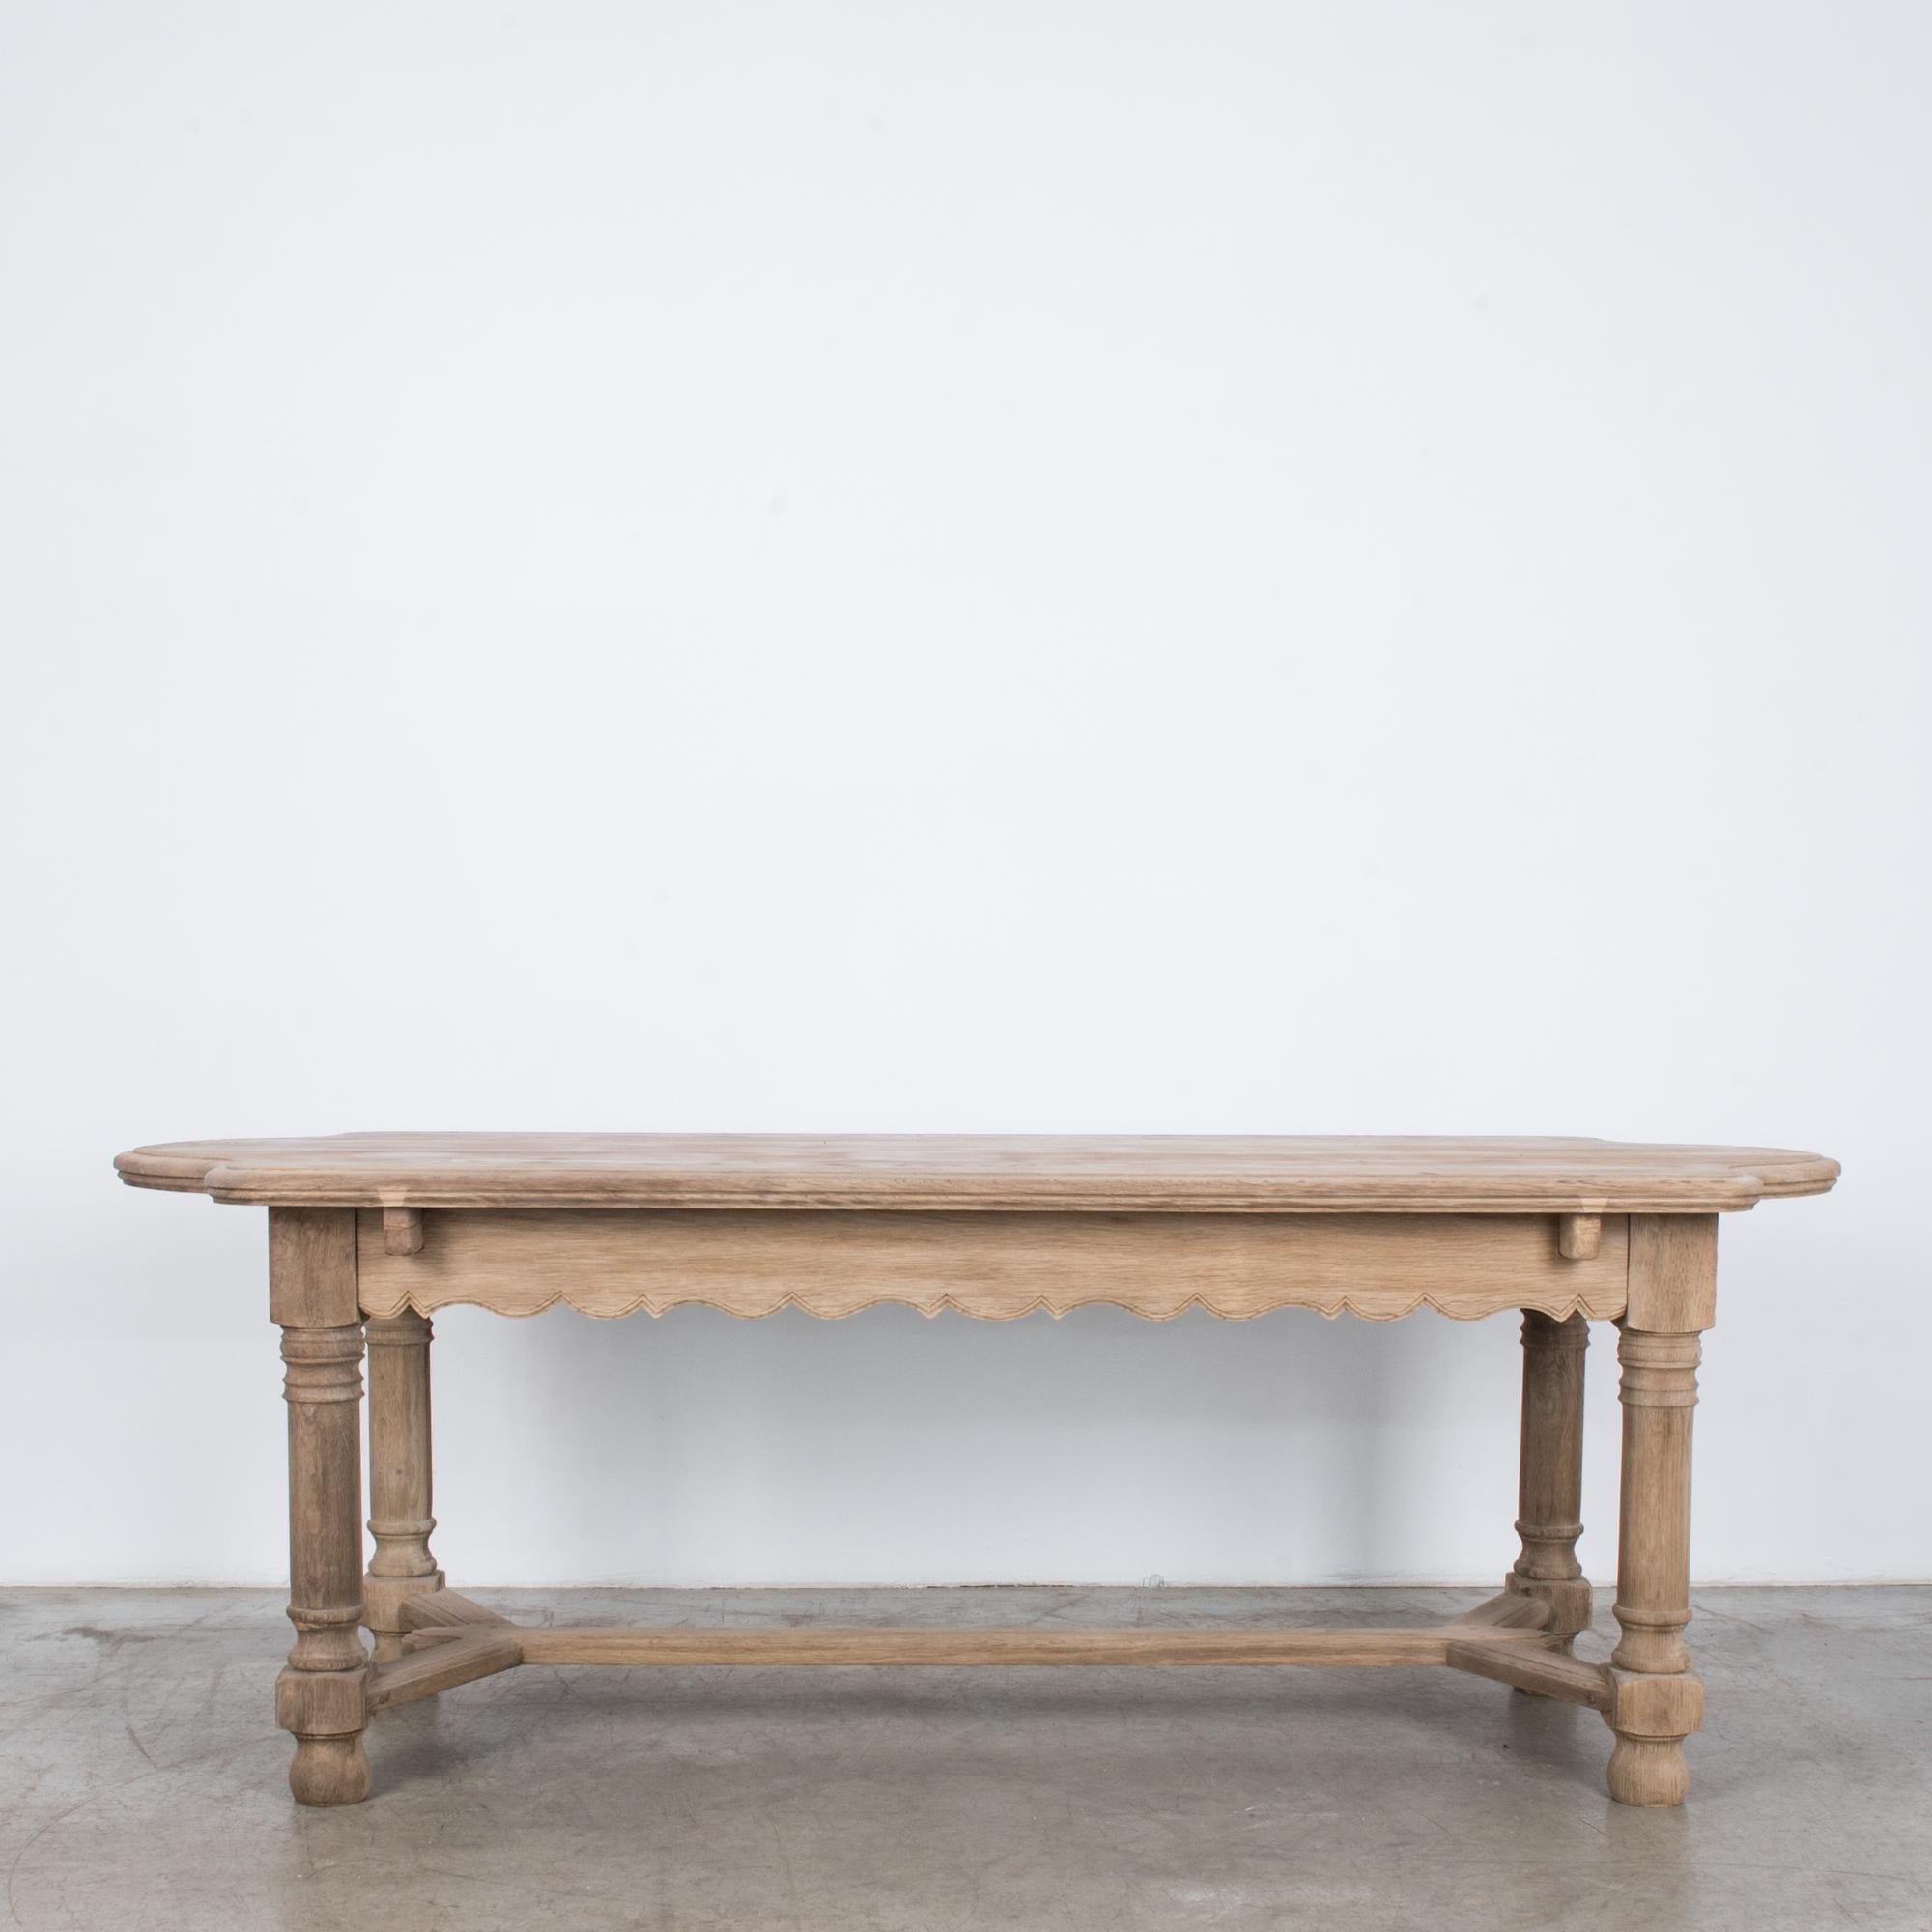 An oak dining table from Belgium, circa 1950. Robust turned legs support an elegantly contoured tabletop. The apron has a dramatic, scalloped border; the legs are joined by a sophisticated strut. The soft, blond color of the restored oak elevates